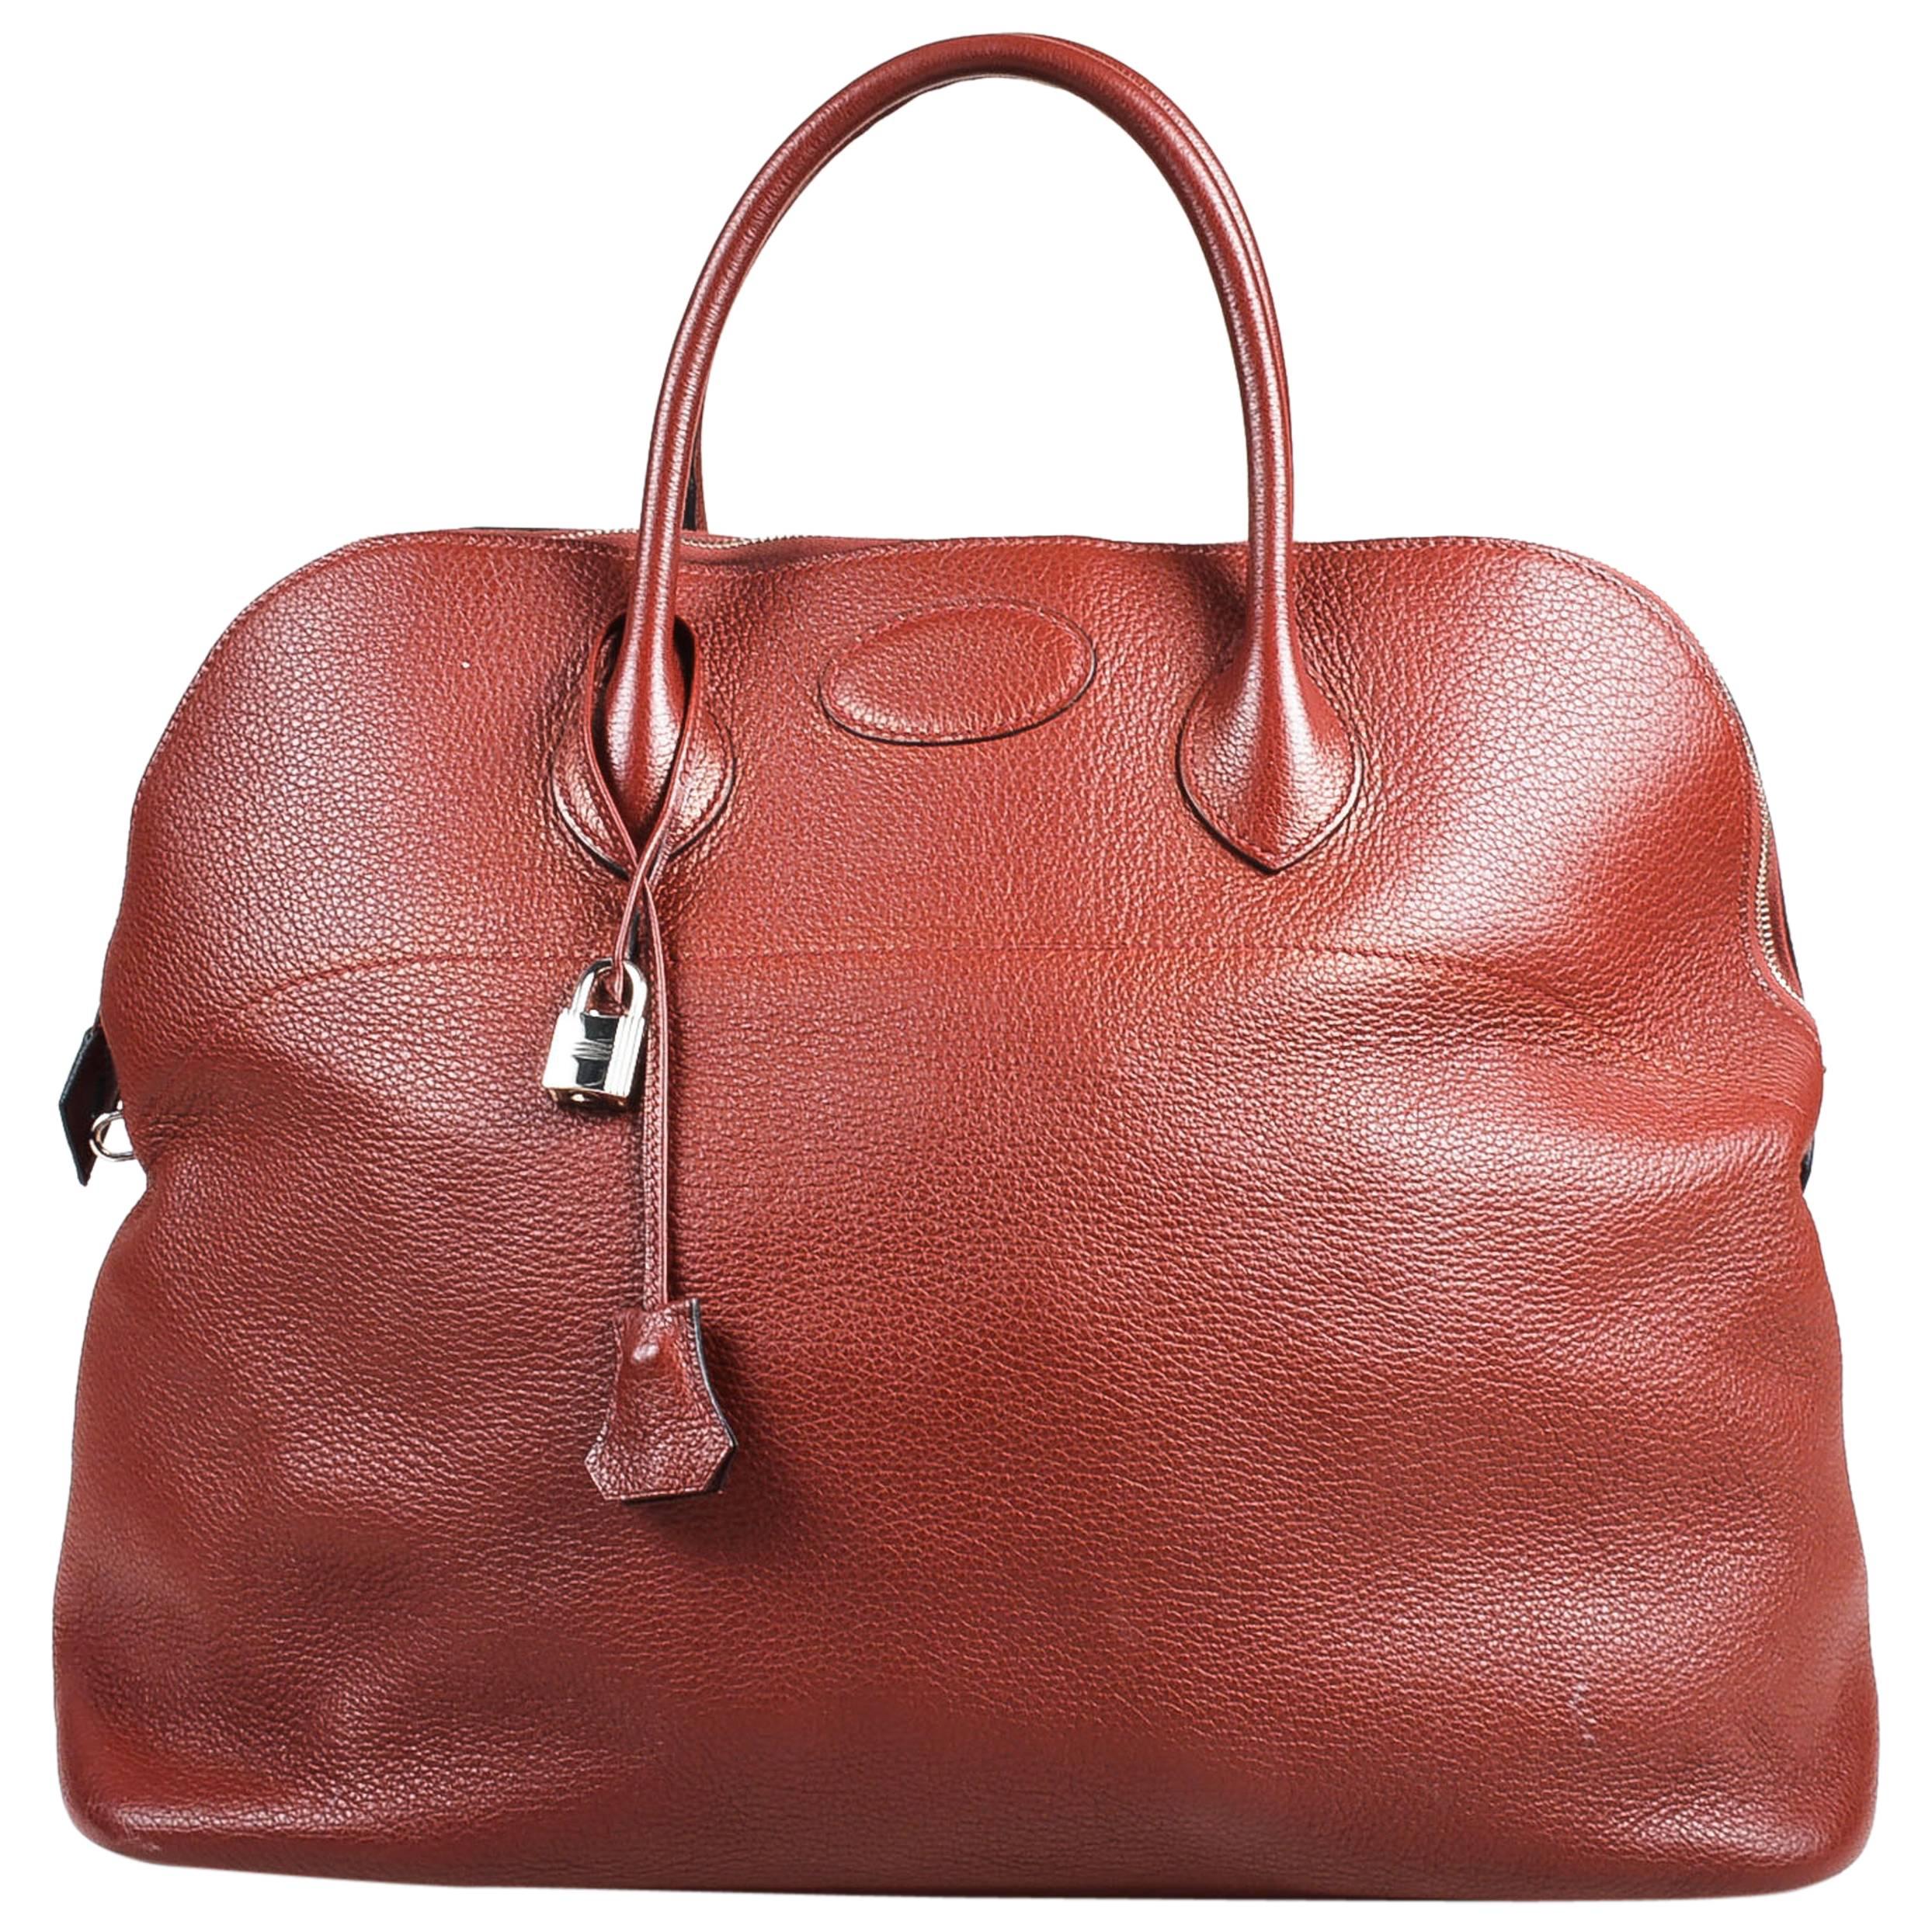 Hermes 'Rouge Venitienne' Clemence Leather Palladium Hardware "Bolide 45" Bag For Sale